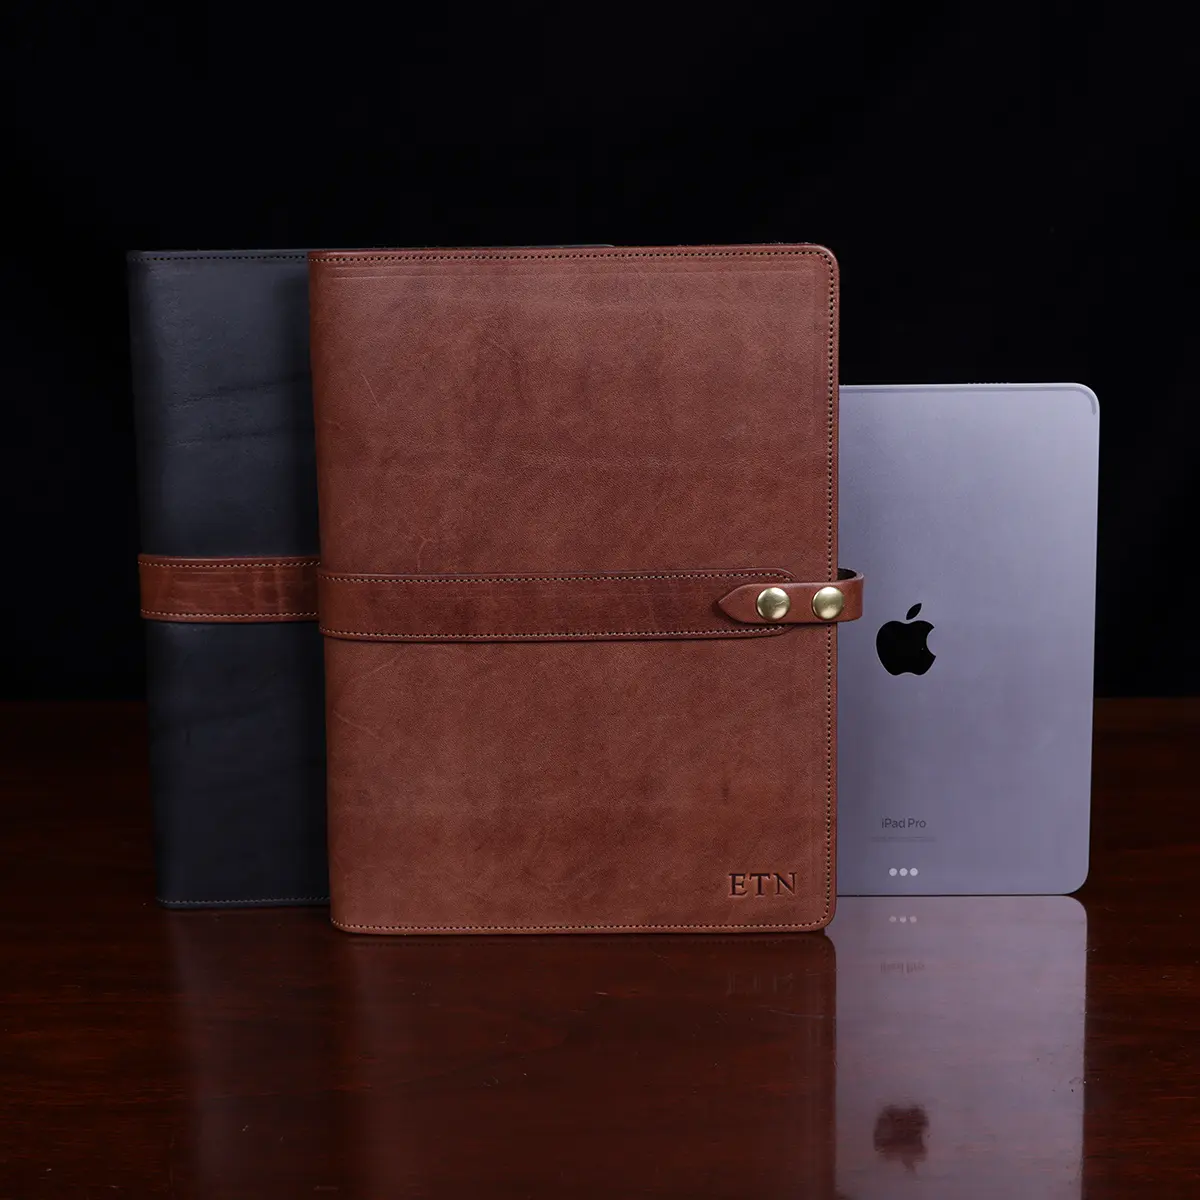 Rugged Leather iPad Portfolio Case With Stand for New iPad Air 